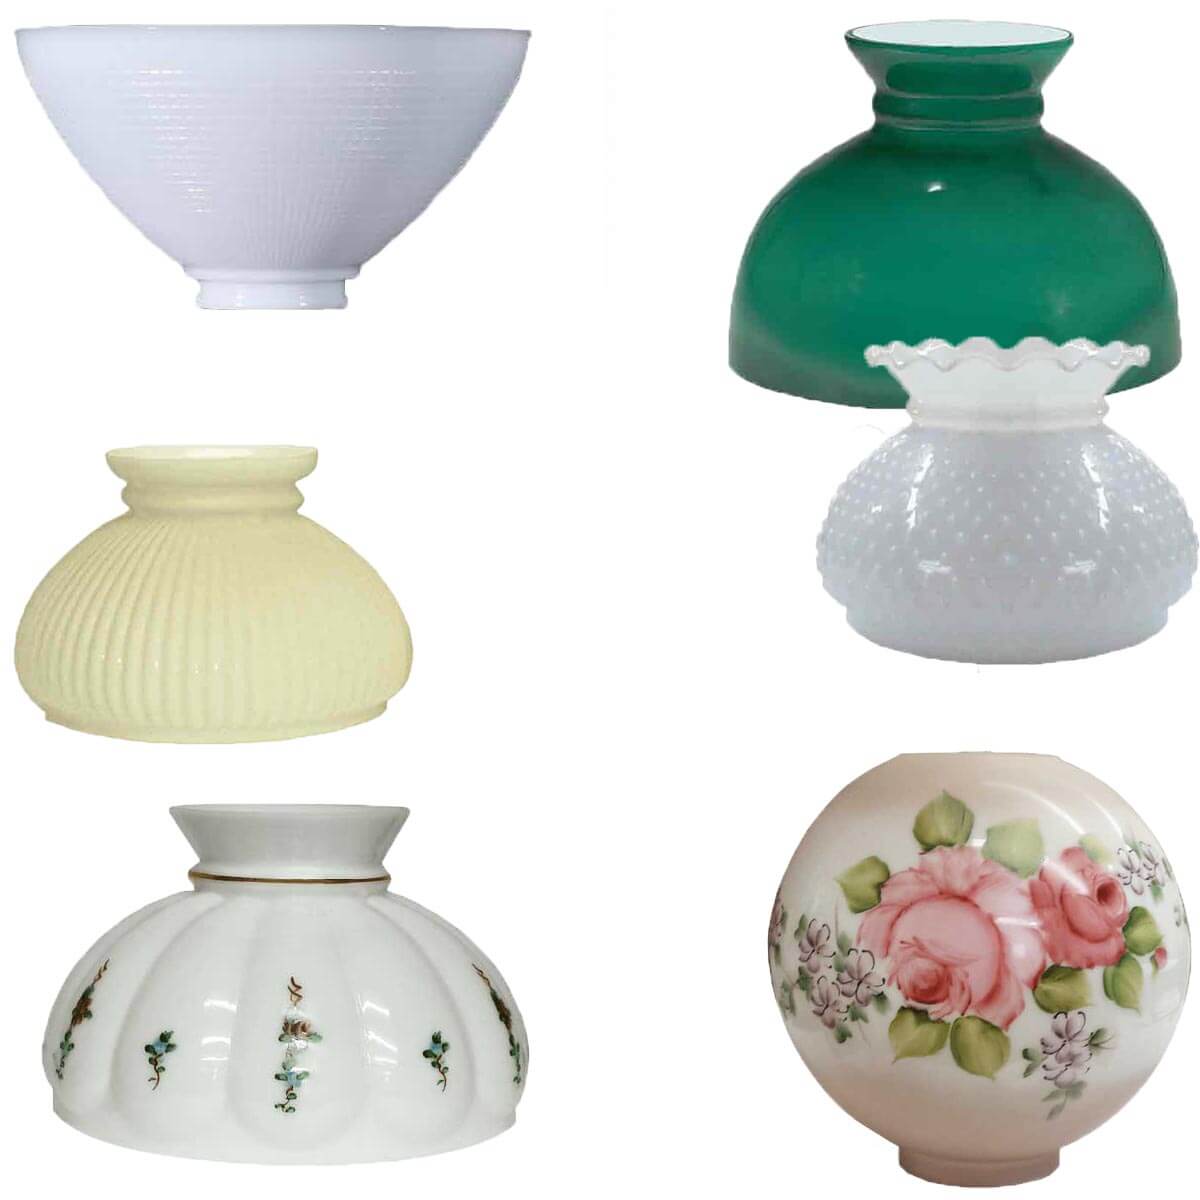 Replacement Glass Lamp Shades for oil lamps, student lamps and banquet lamps.